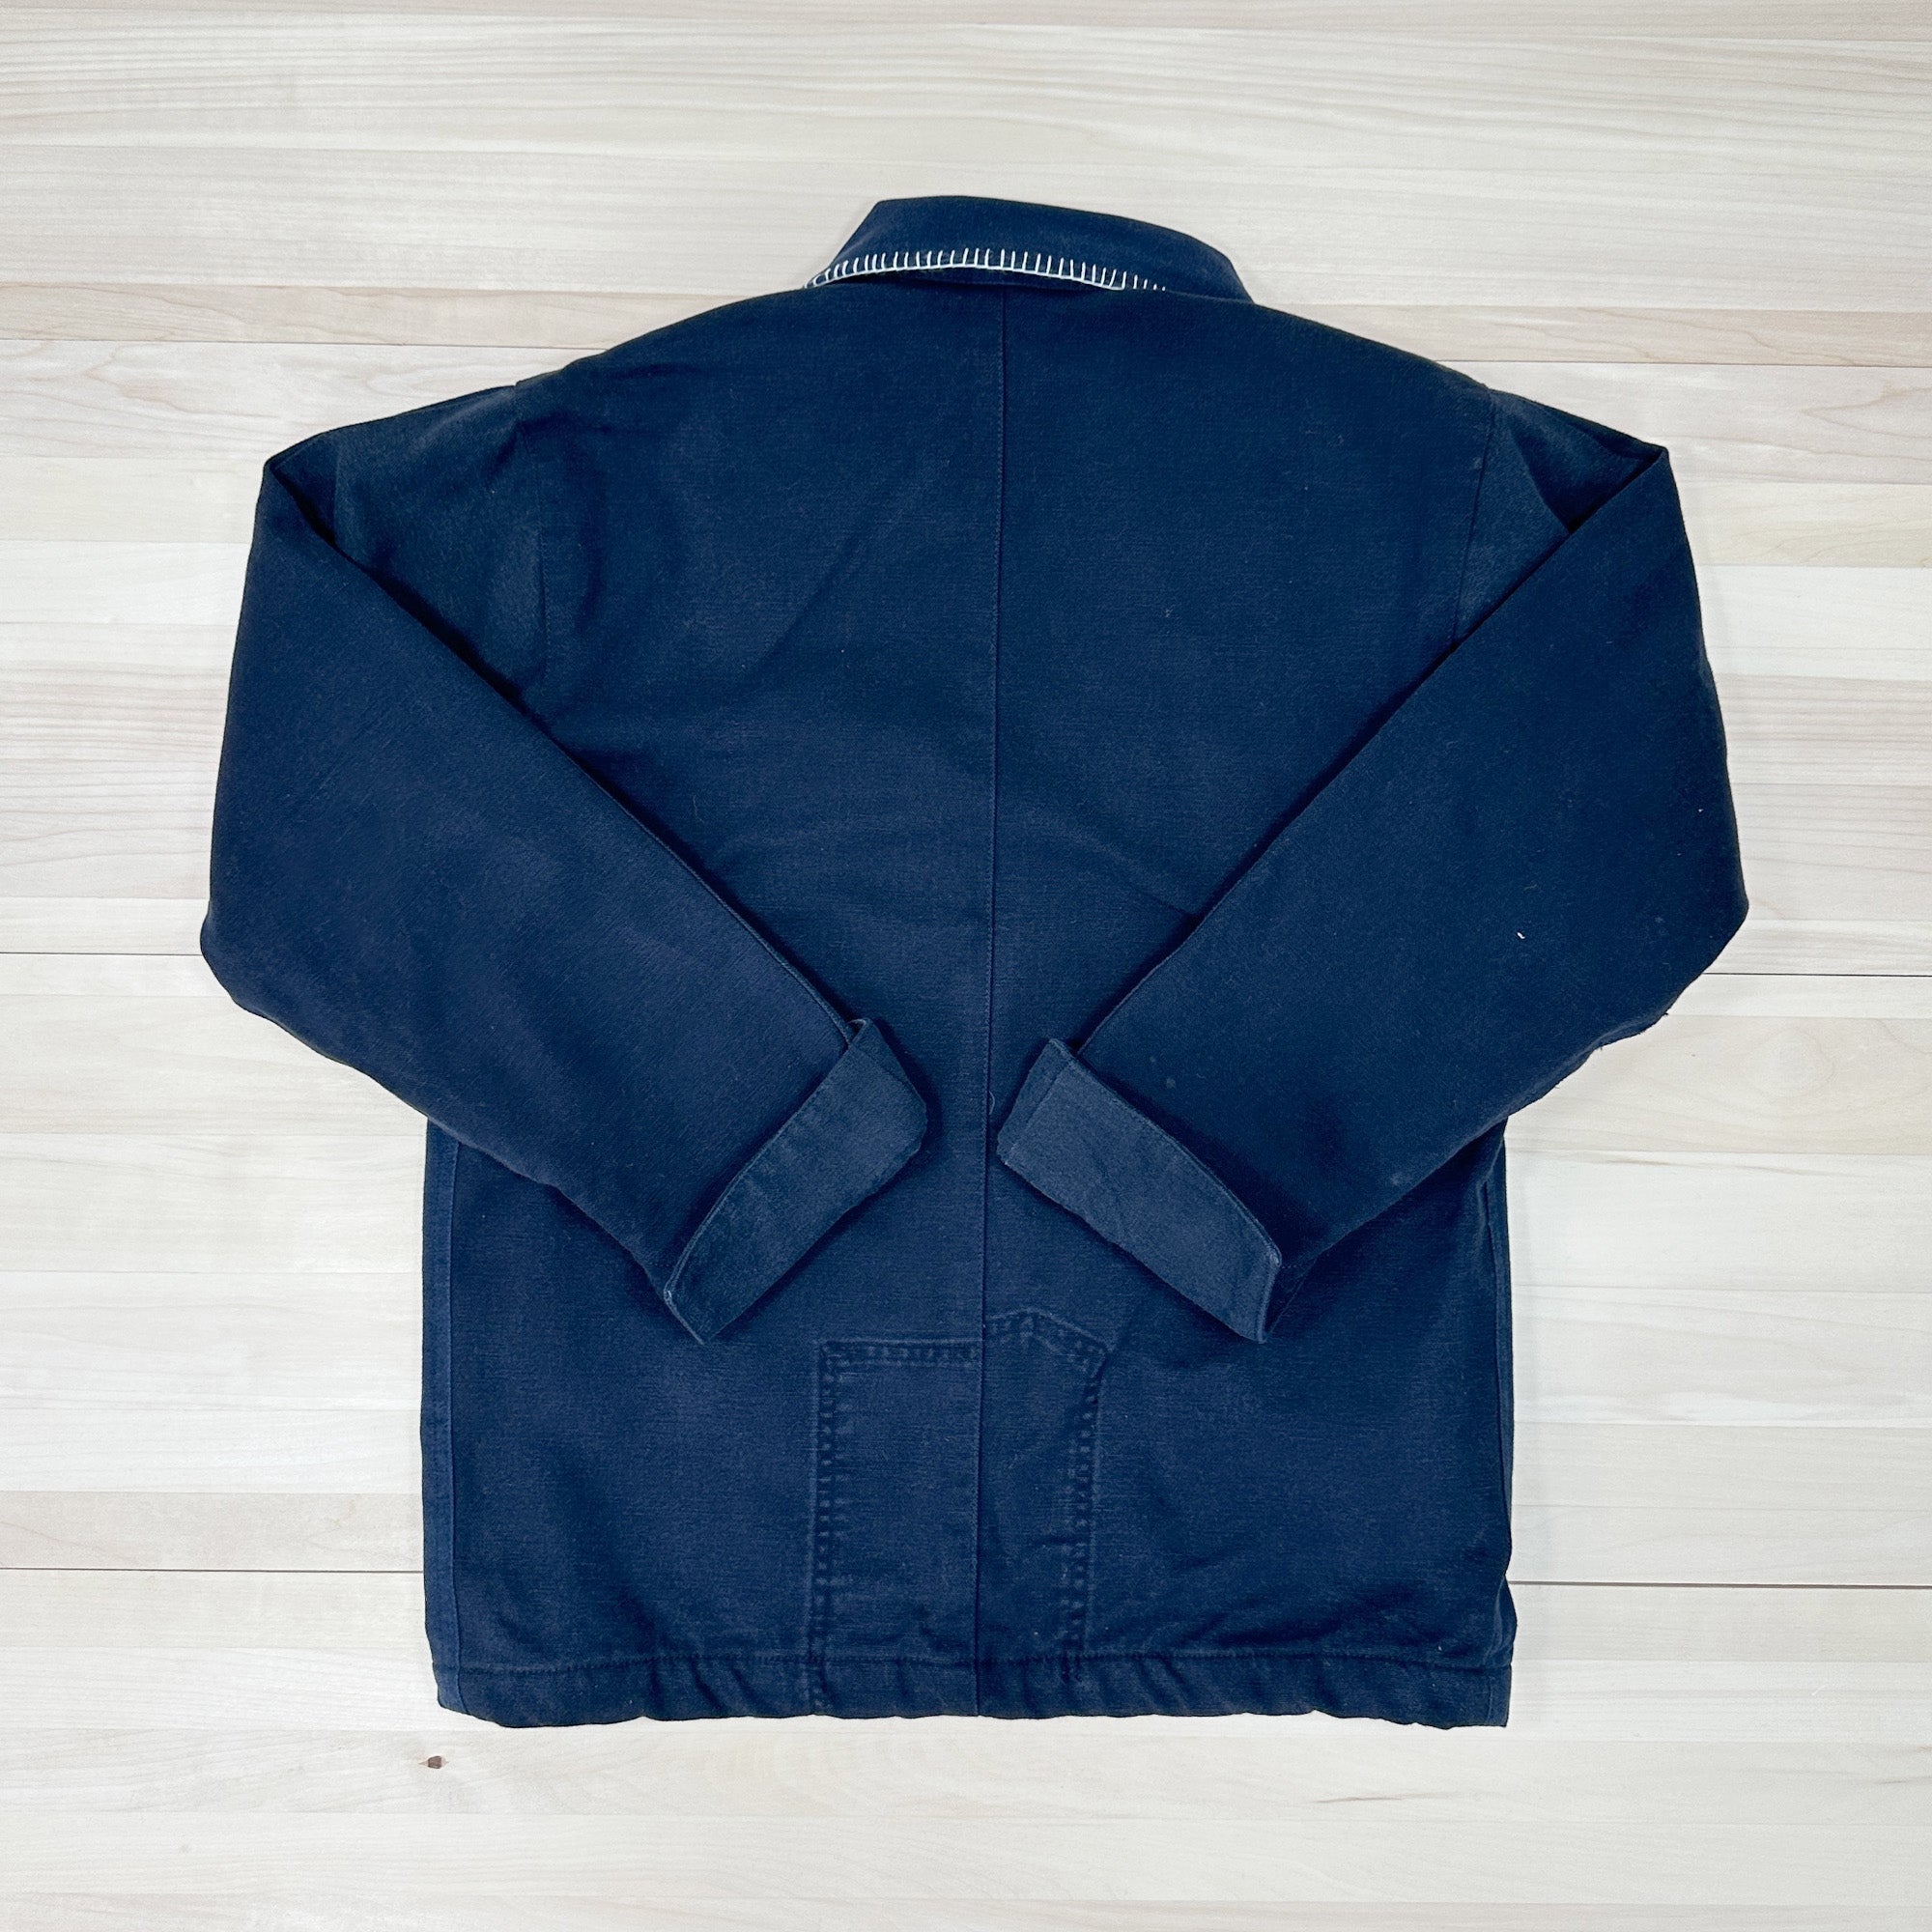 Women's Chore Coat Made From Upcycled Work Jeans - Blanket Stitching - Small Great Lakes Reclaimed Denim